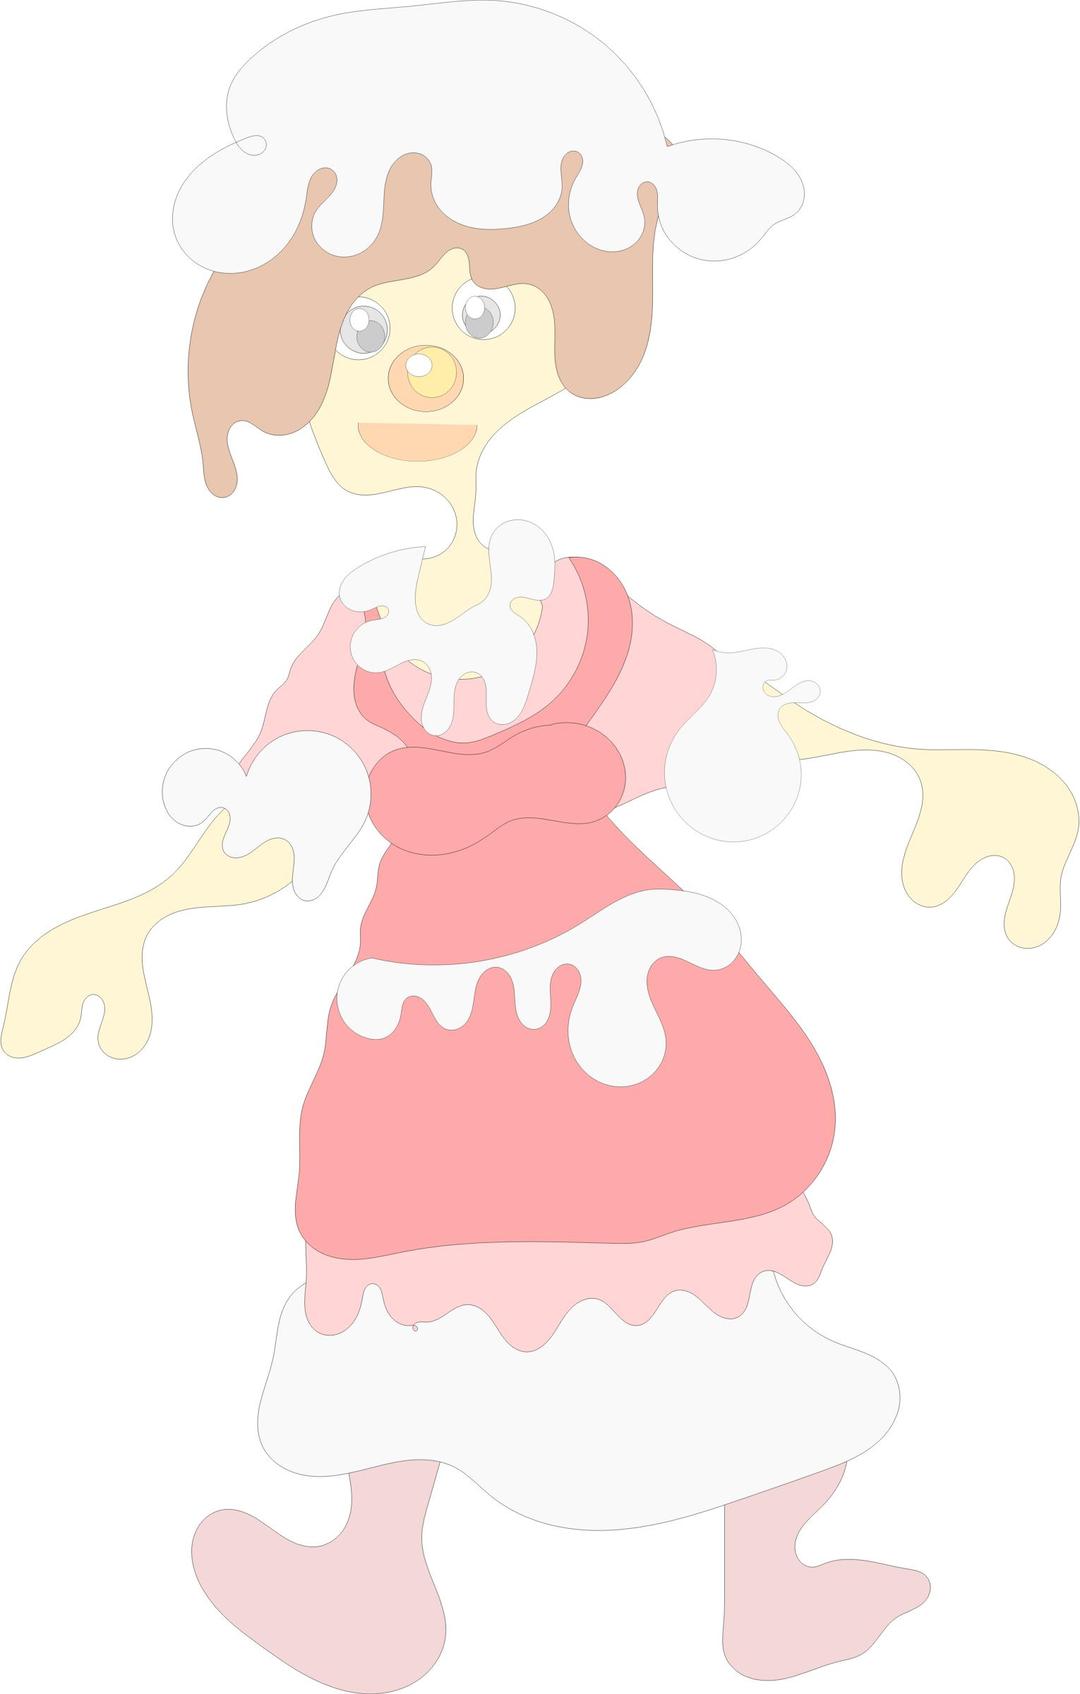 Woman in pink dress png transparent